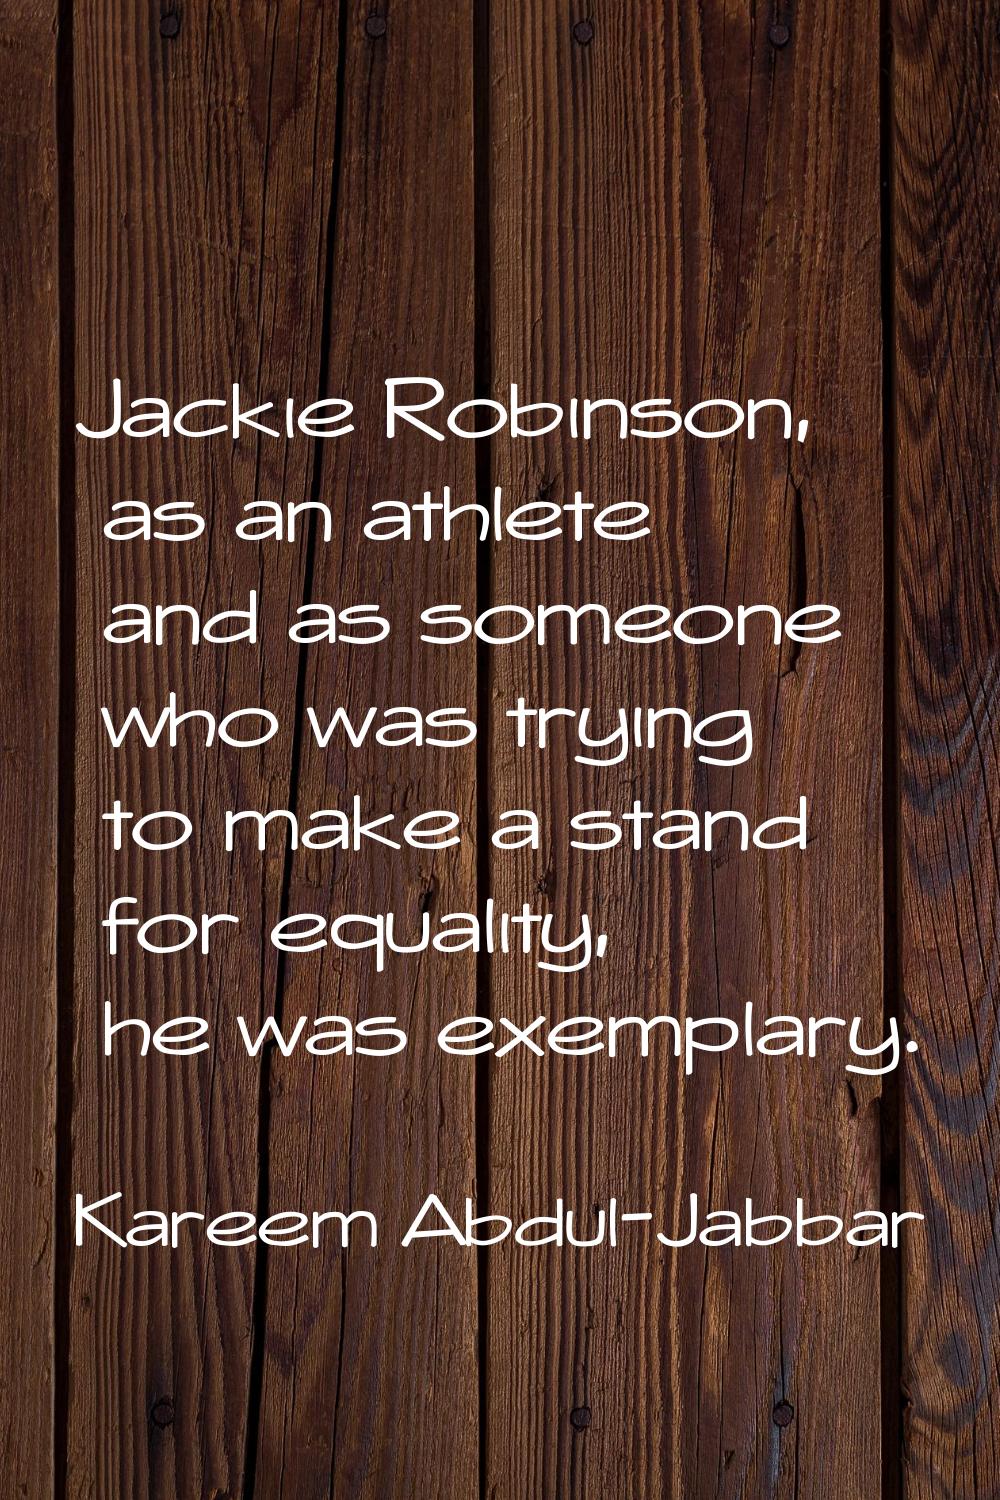 Jackie Robinson, as an athlete and as someone who was trying to make a stand for equality, he was e